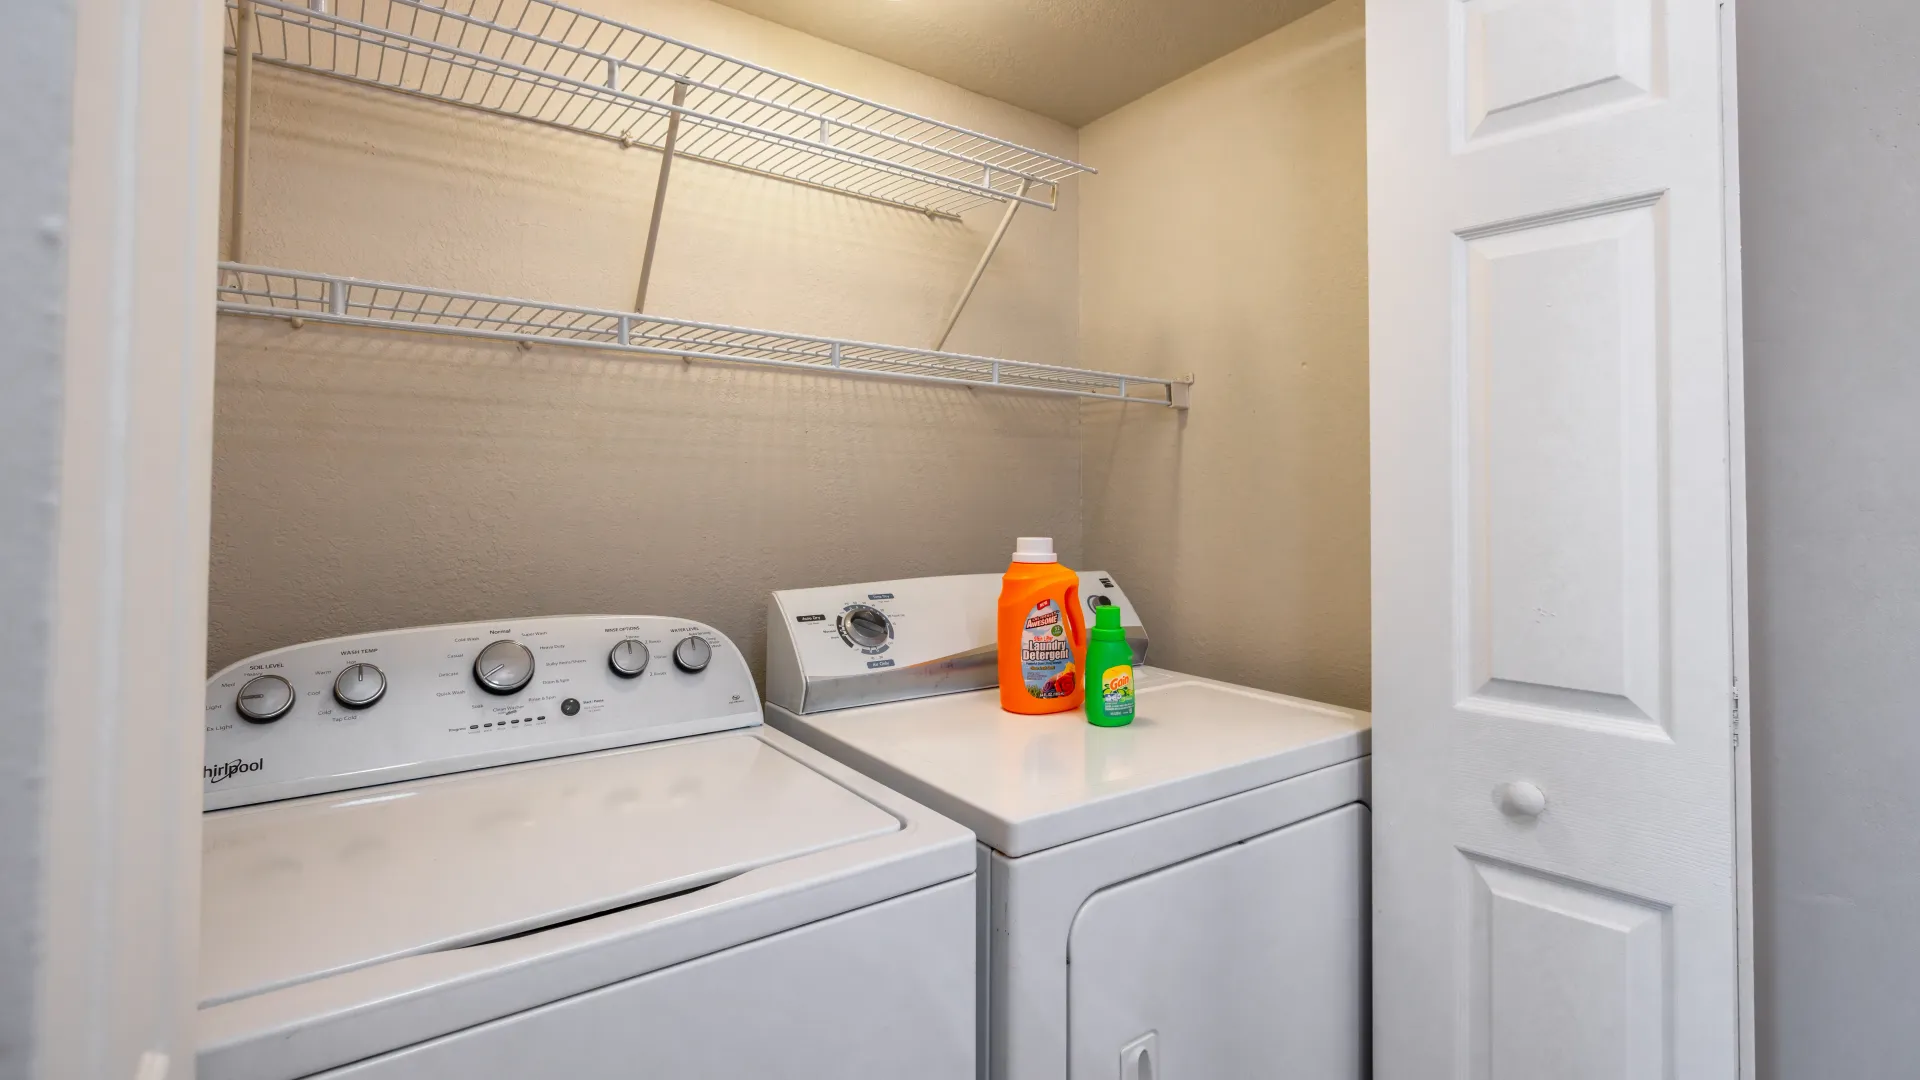 A convenient laundry room adjacent to the kitchen, featuring extra shelving above full-size appliances.